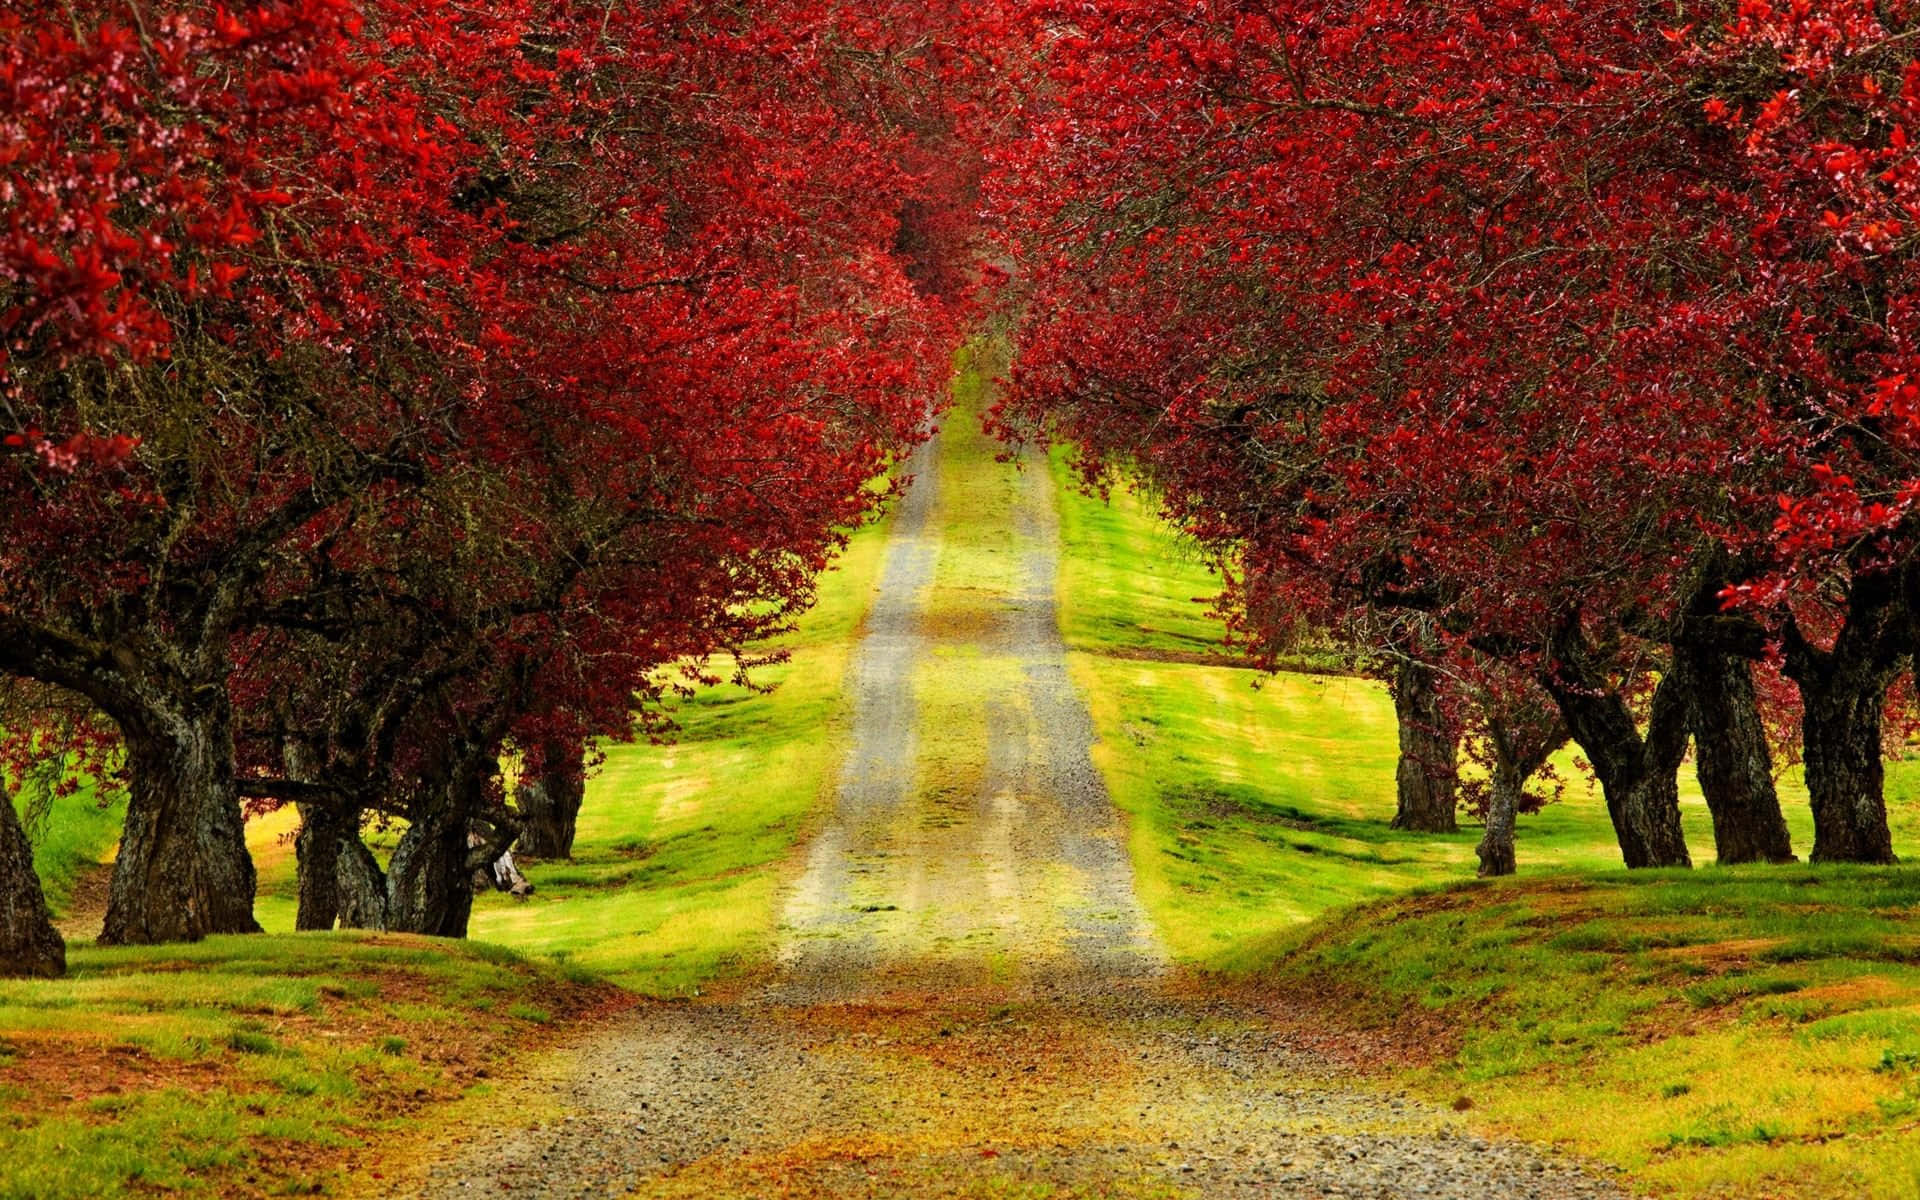 A picturesque view of Red Tree in all its glory. Wallpaper